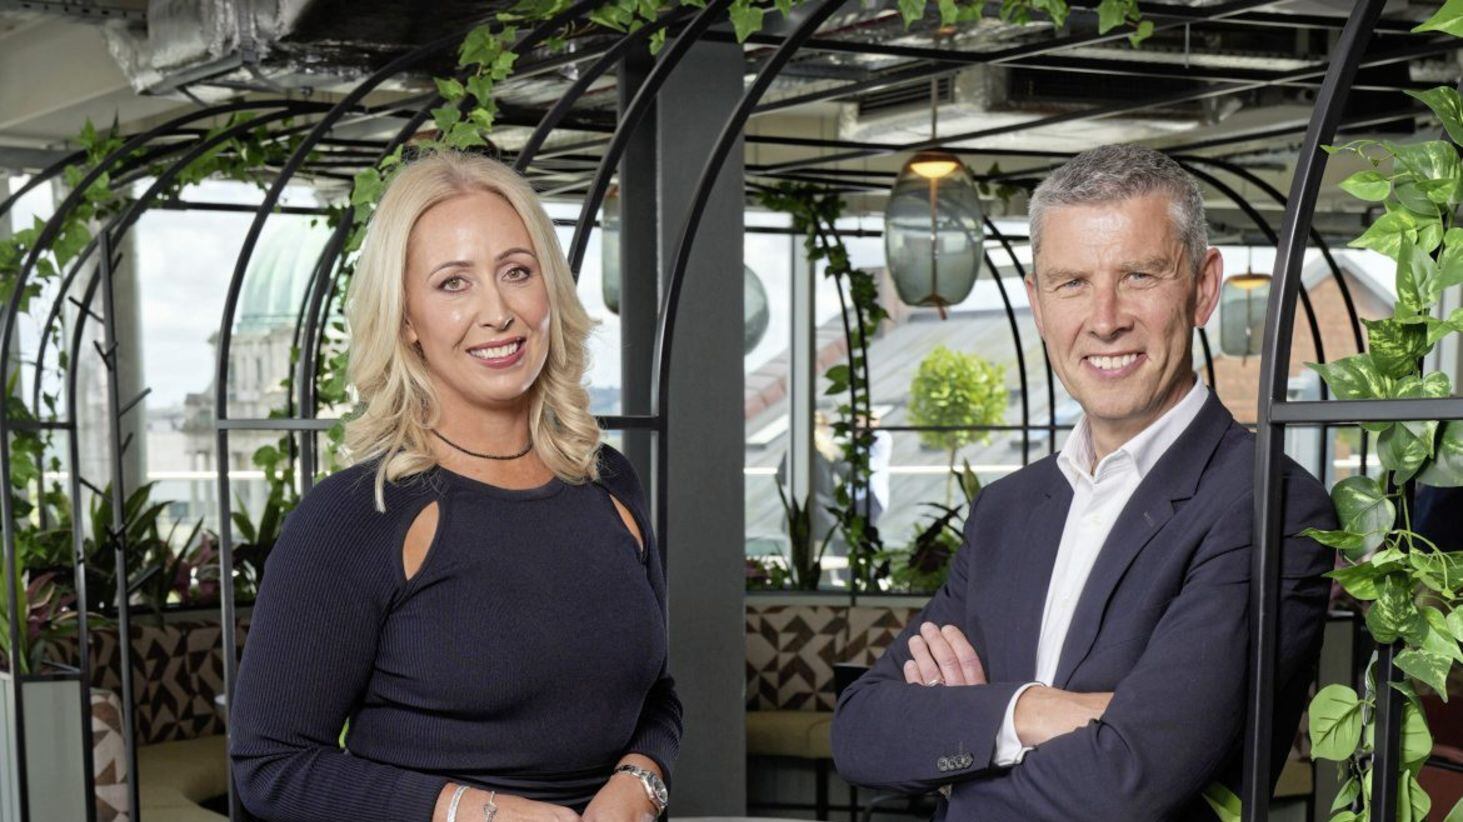 New PwC Northern Ireland regional market leader Caitroina McCusker with her predecessor Kevin MacAllister, who retires on July 1 